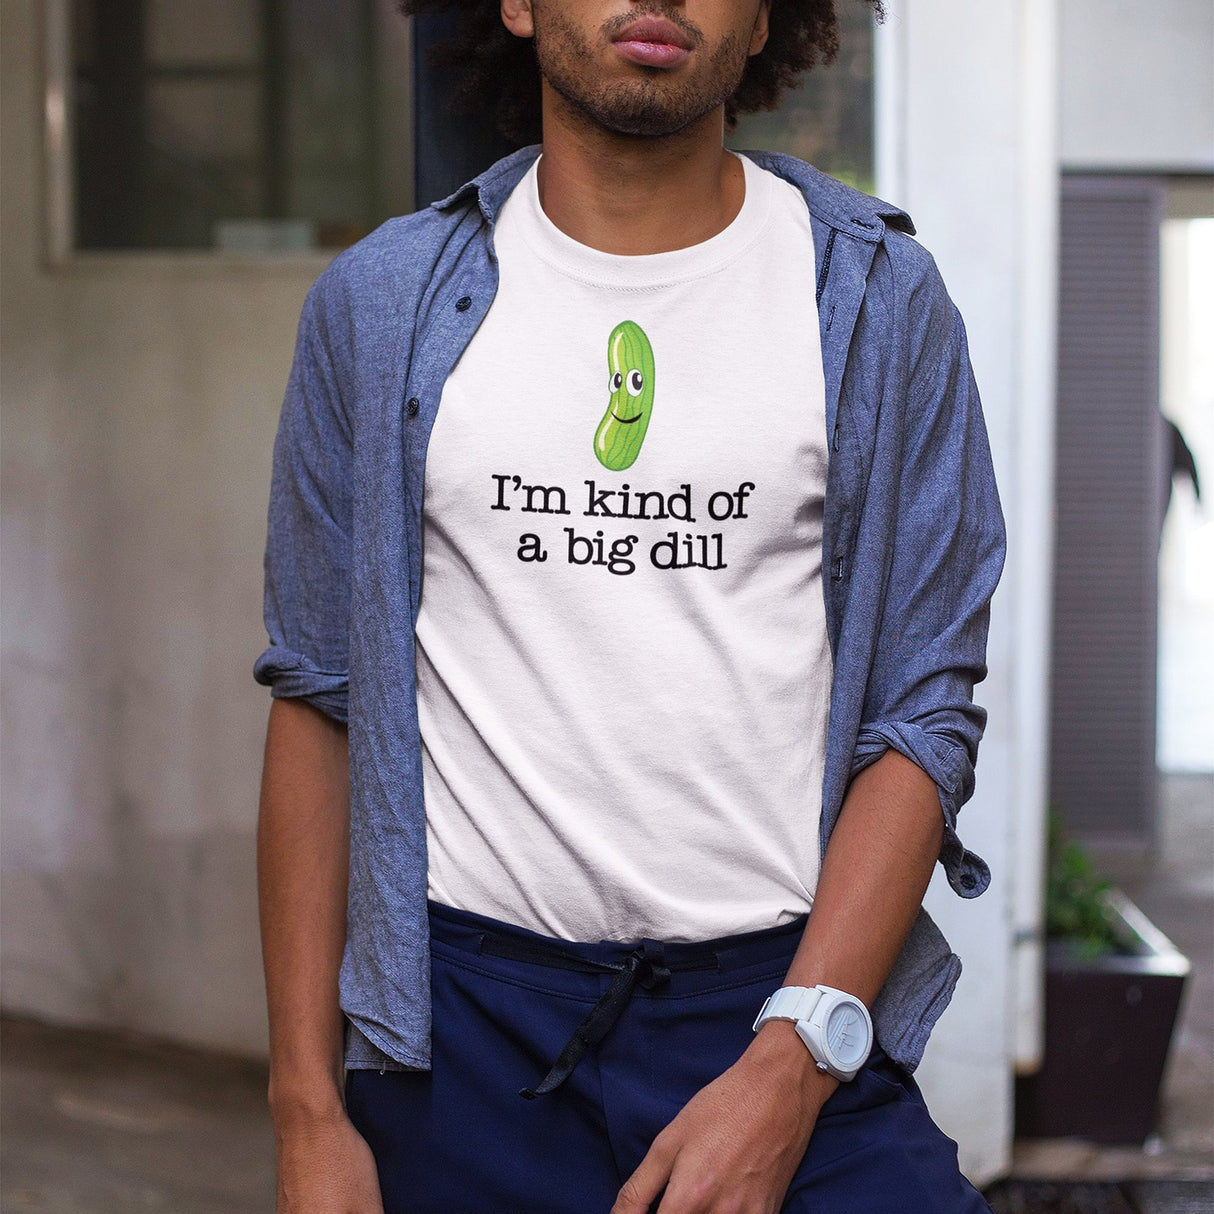 im-kind-of-a-big-dill-food-tee-life-t-shirt-punny-tee-clever-t-shirt-humorous-tee#color_white